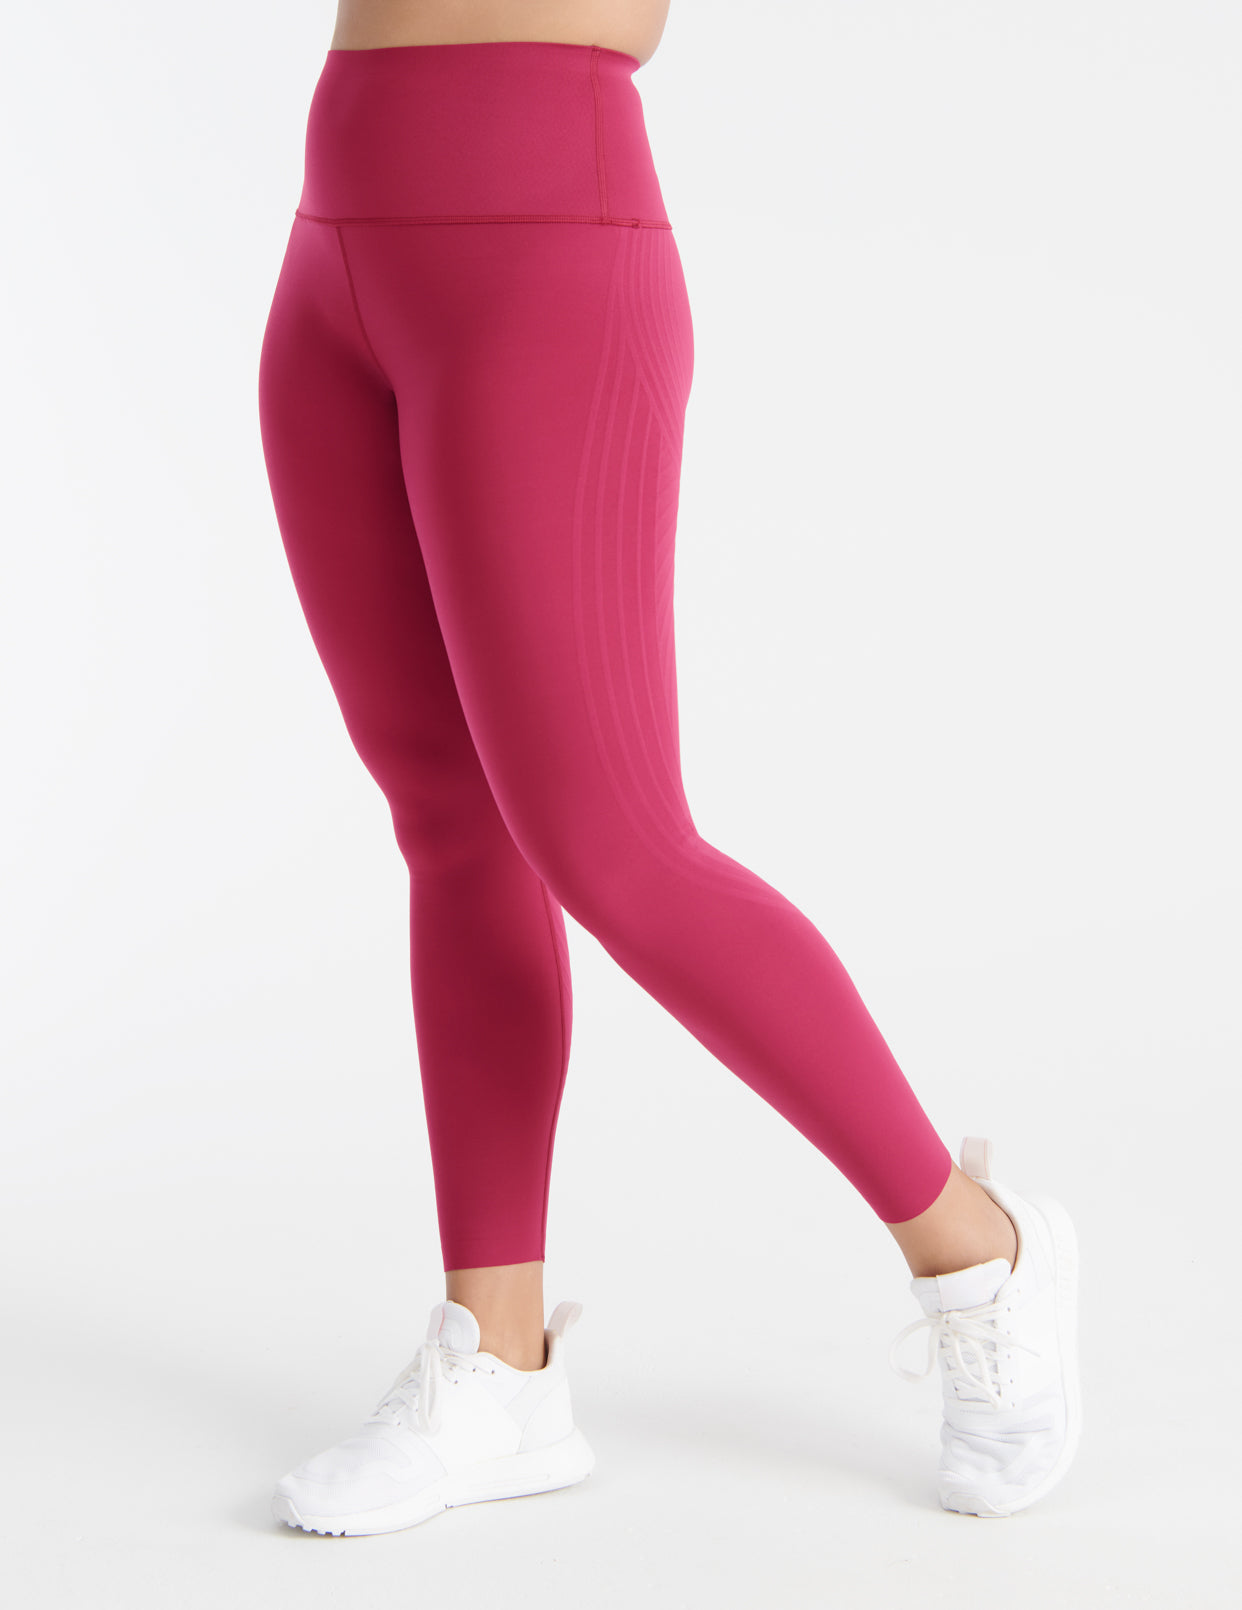 Knix HiTouch High Rise Legging Size M - $47 New With Tags - From Ethel